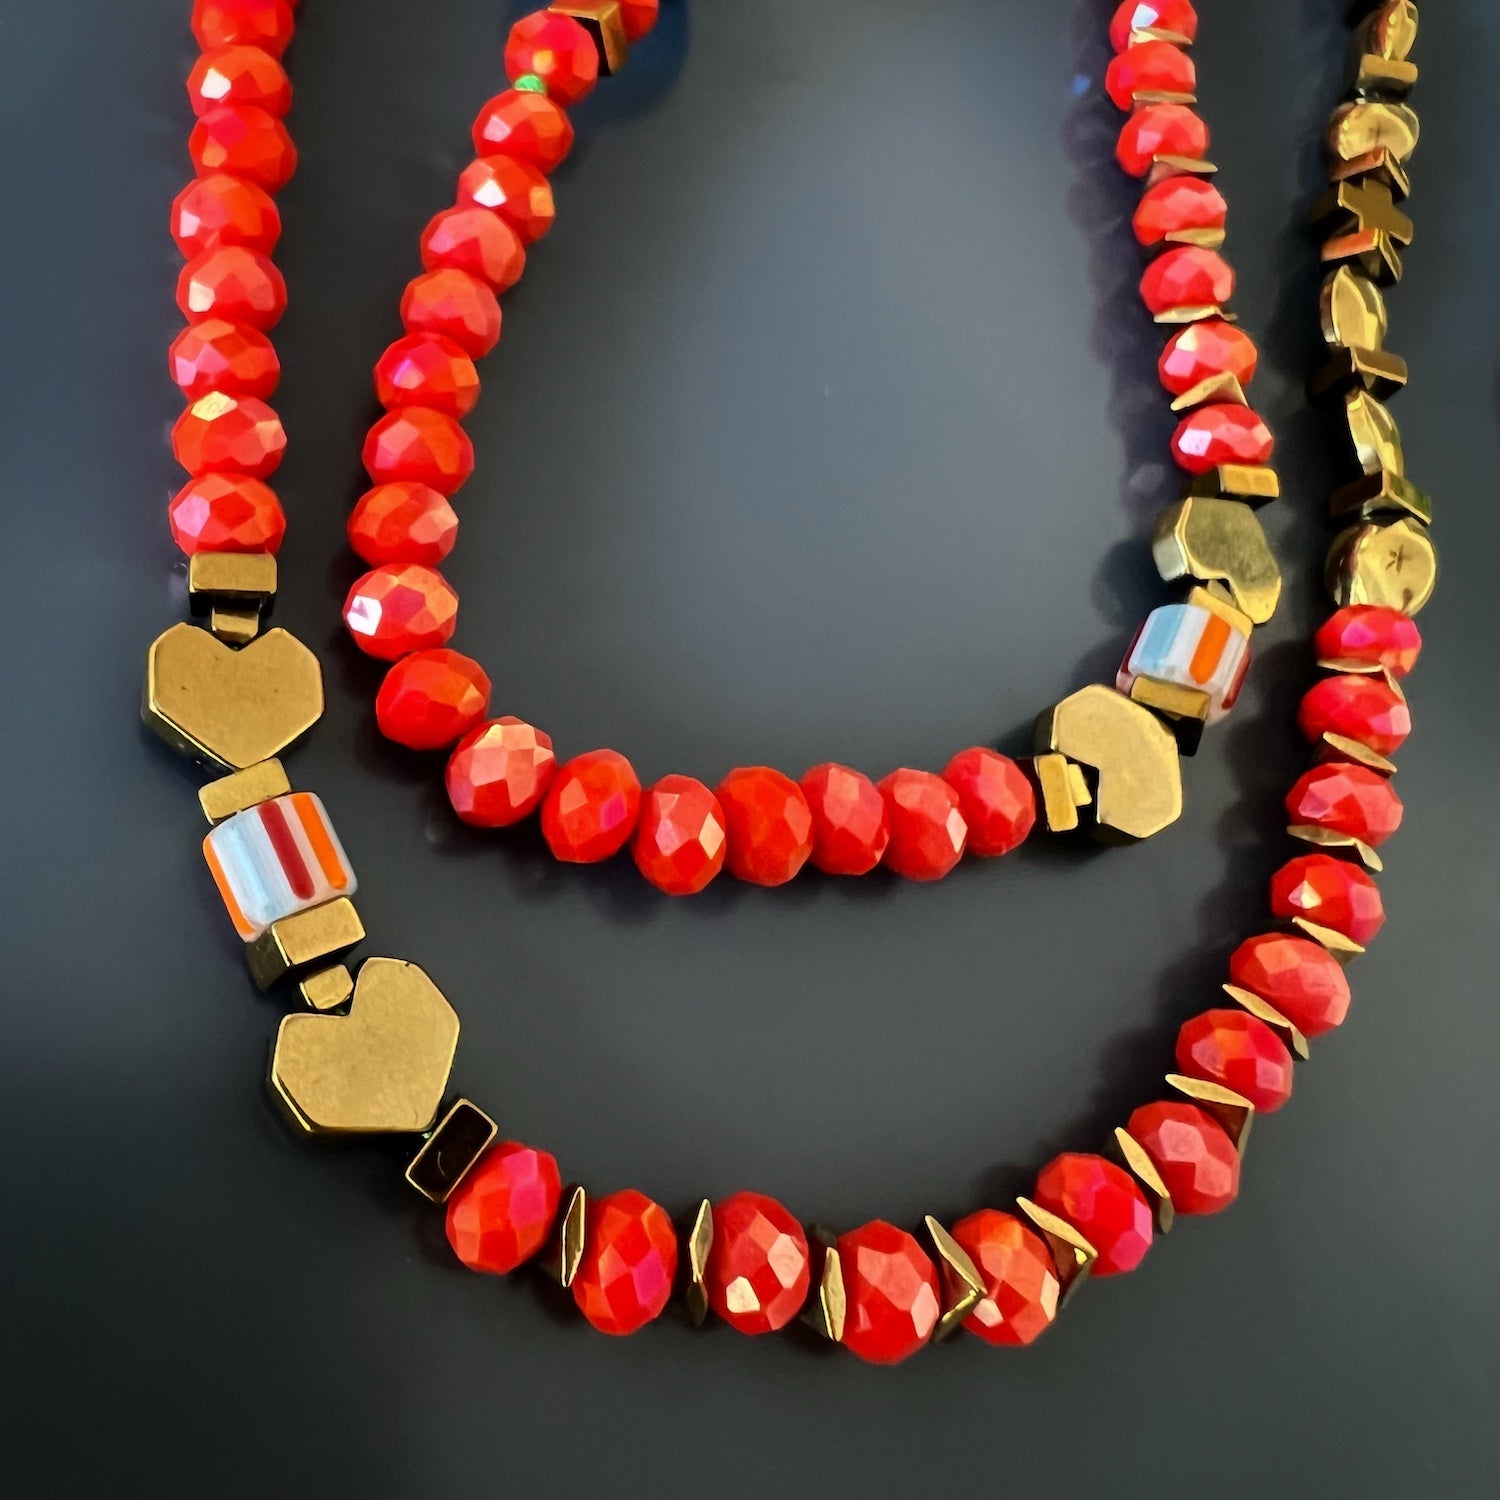 The Mystic Bohemian Elephant Necklace, as seen in the image, combines the strength and good luck symbolized by the elephant pendant with the colorful and mystical elements of its beadwork, making it a truly unique and meaningful accessory.